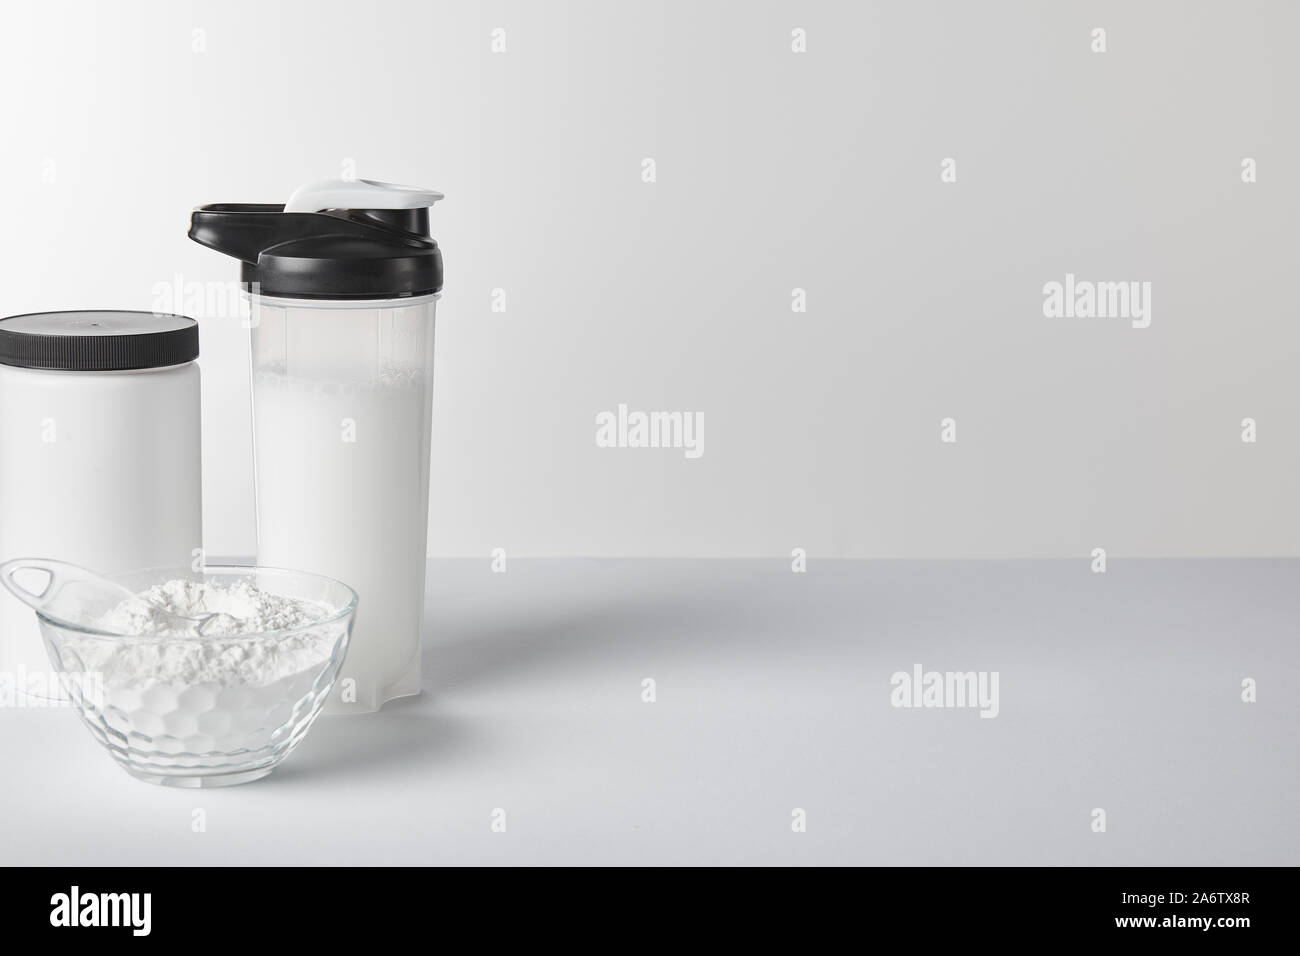 https://c8.alamy.com/comp/2A6TX8R/sports-bottle-with-protein-shake-near-jar-and-protein-powder-on-white-2A6TX8R.jpg